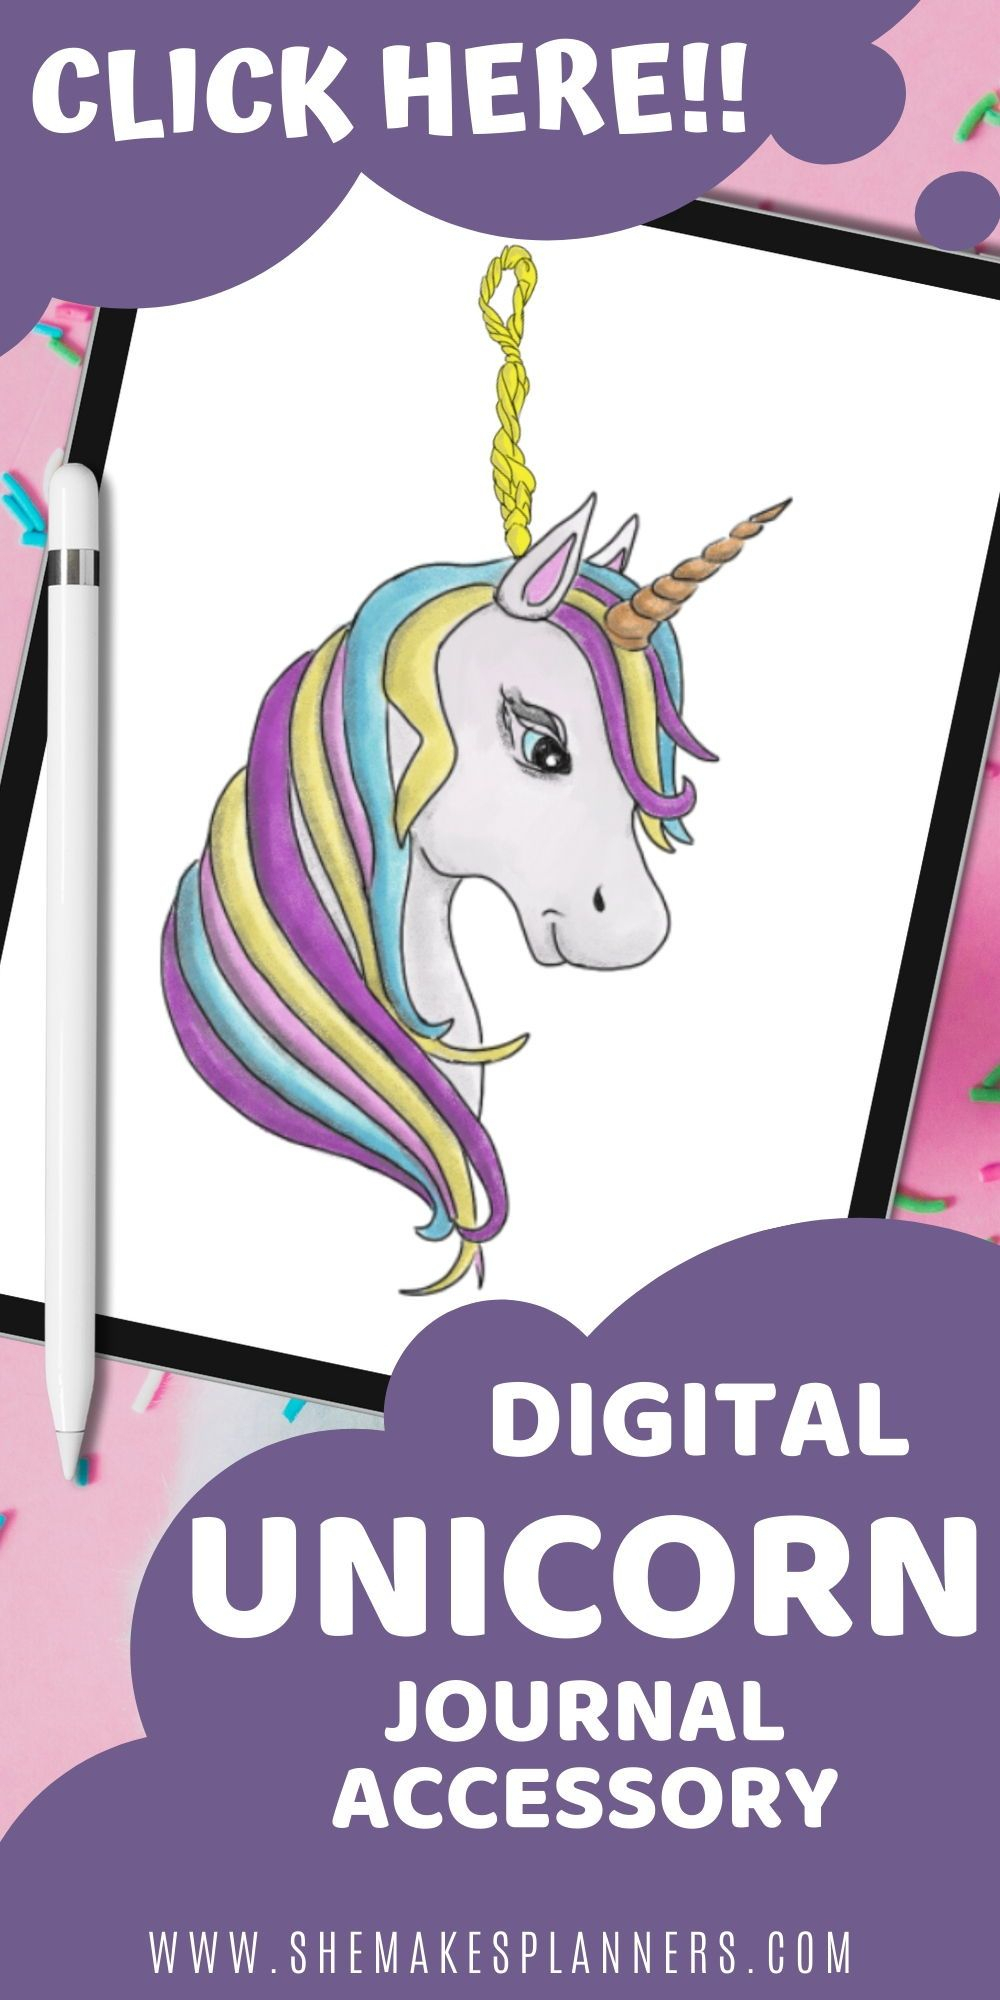 Unicorn Planner Charm Dangle Accessory For Digital with regard to Advice From A Unicorn Calendar